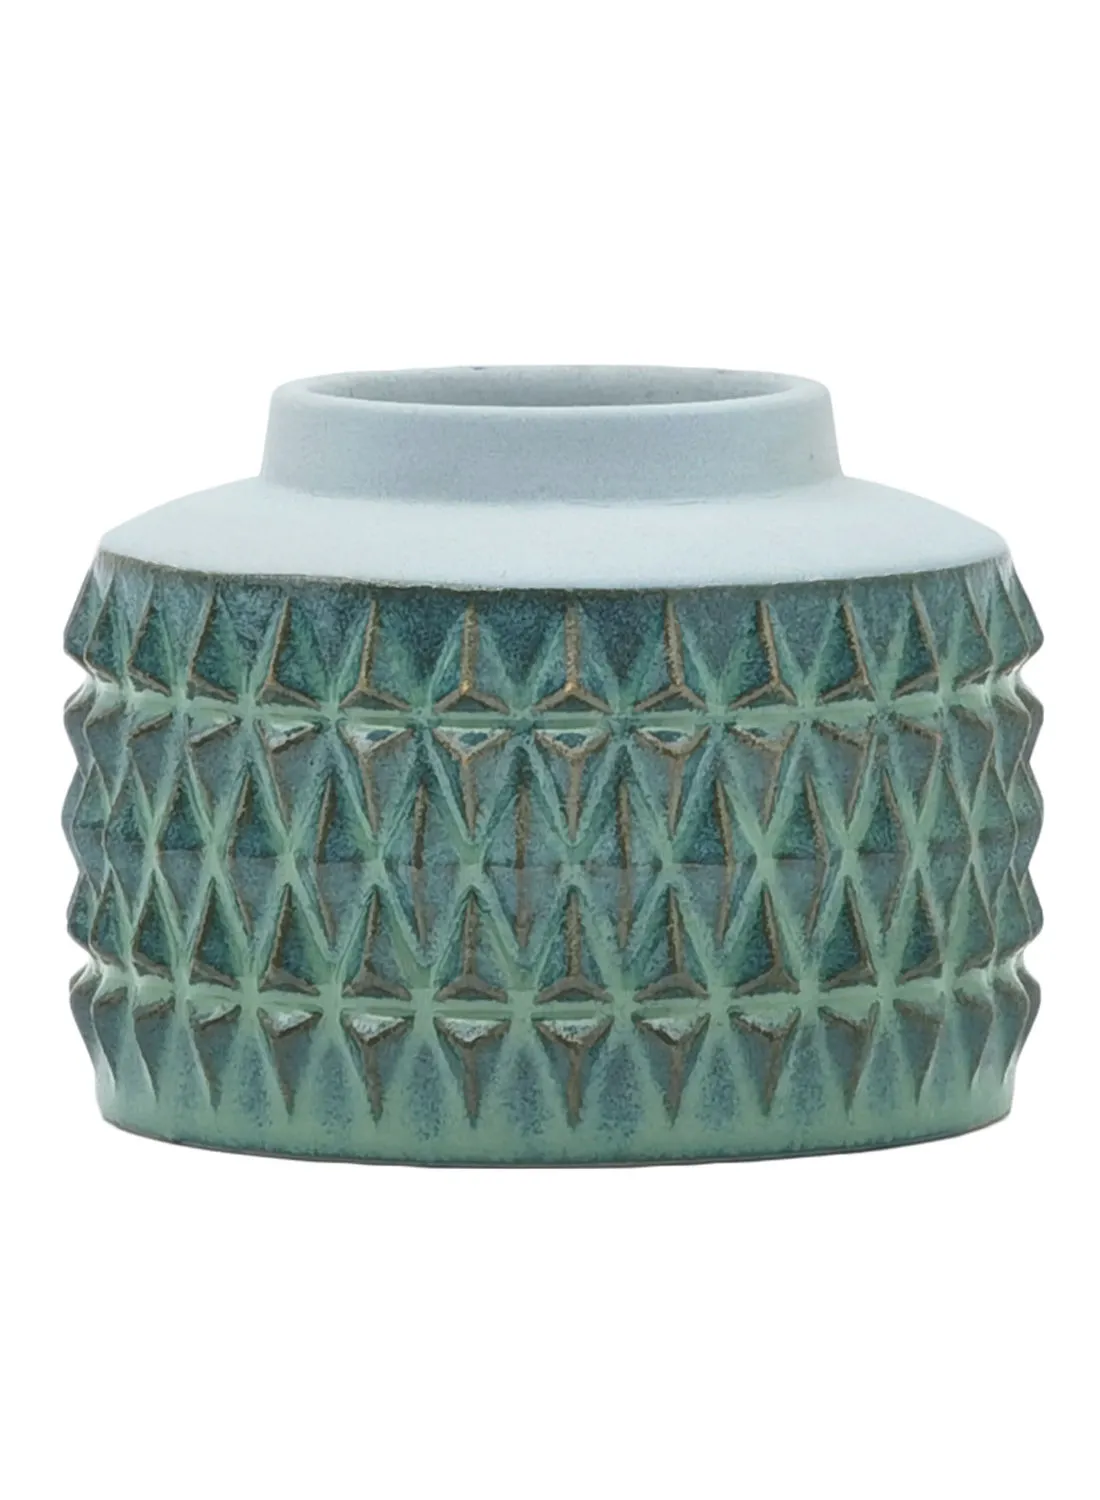 ebb & flow Textured Geometric Pattern Ceramic Vase Unique Luxury Quality Material For The Perfect Stylish Home N13-047 Green/Blue 15 x 11.5cm